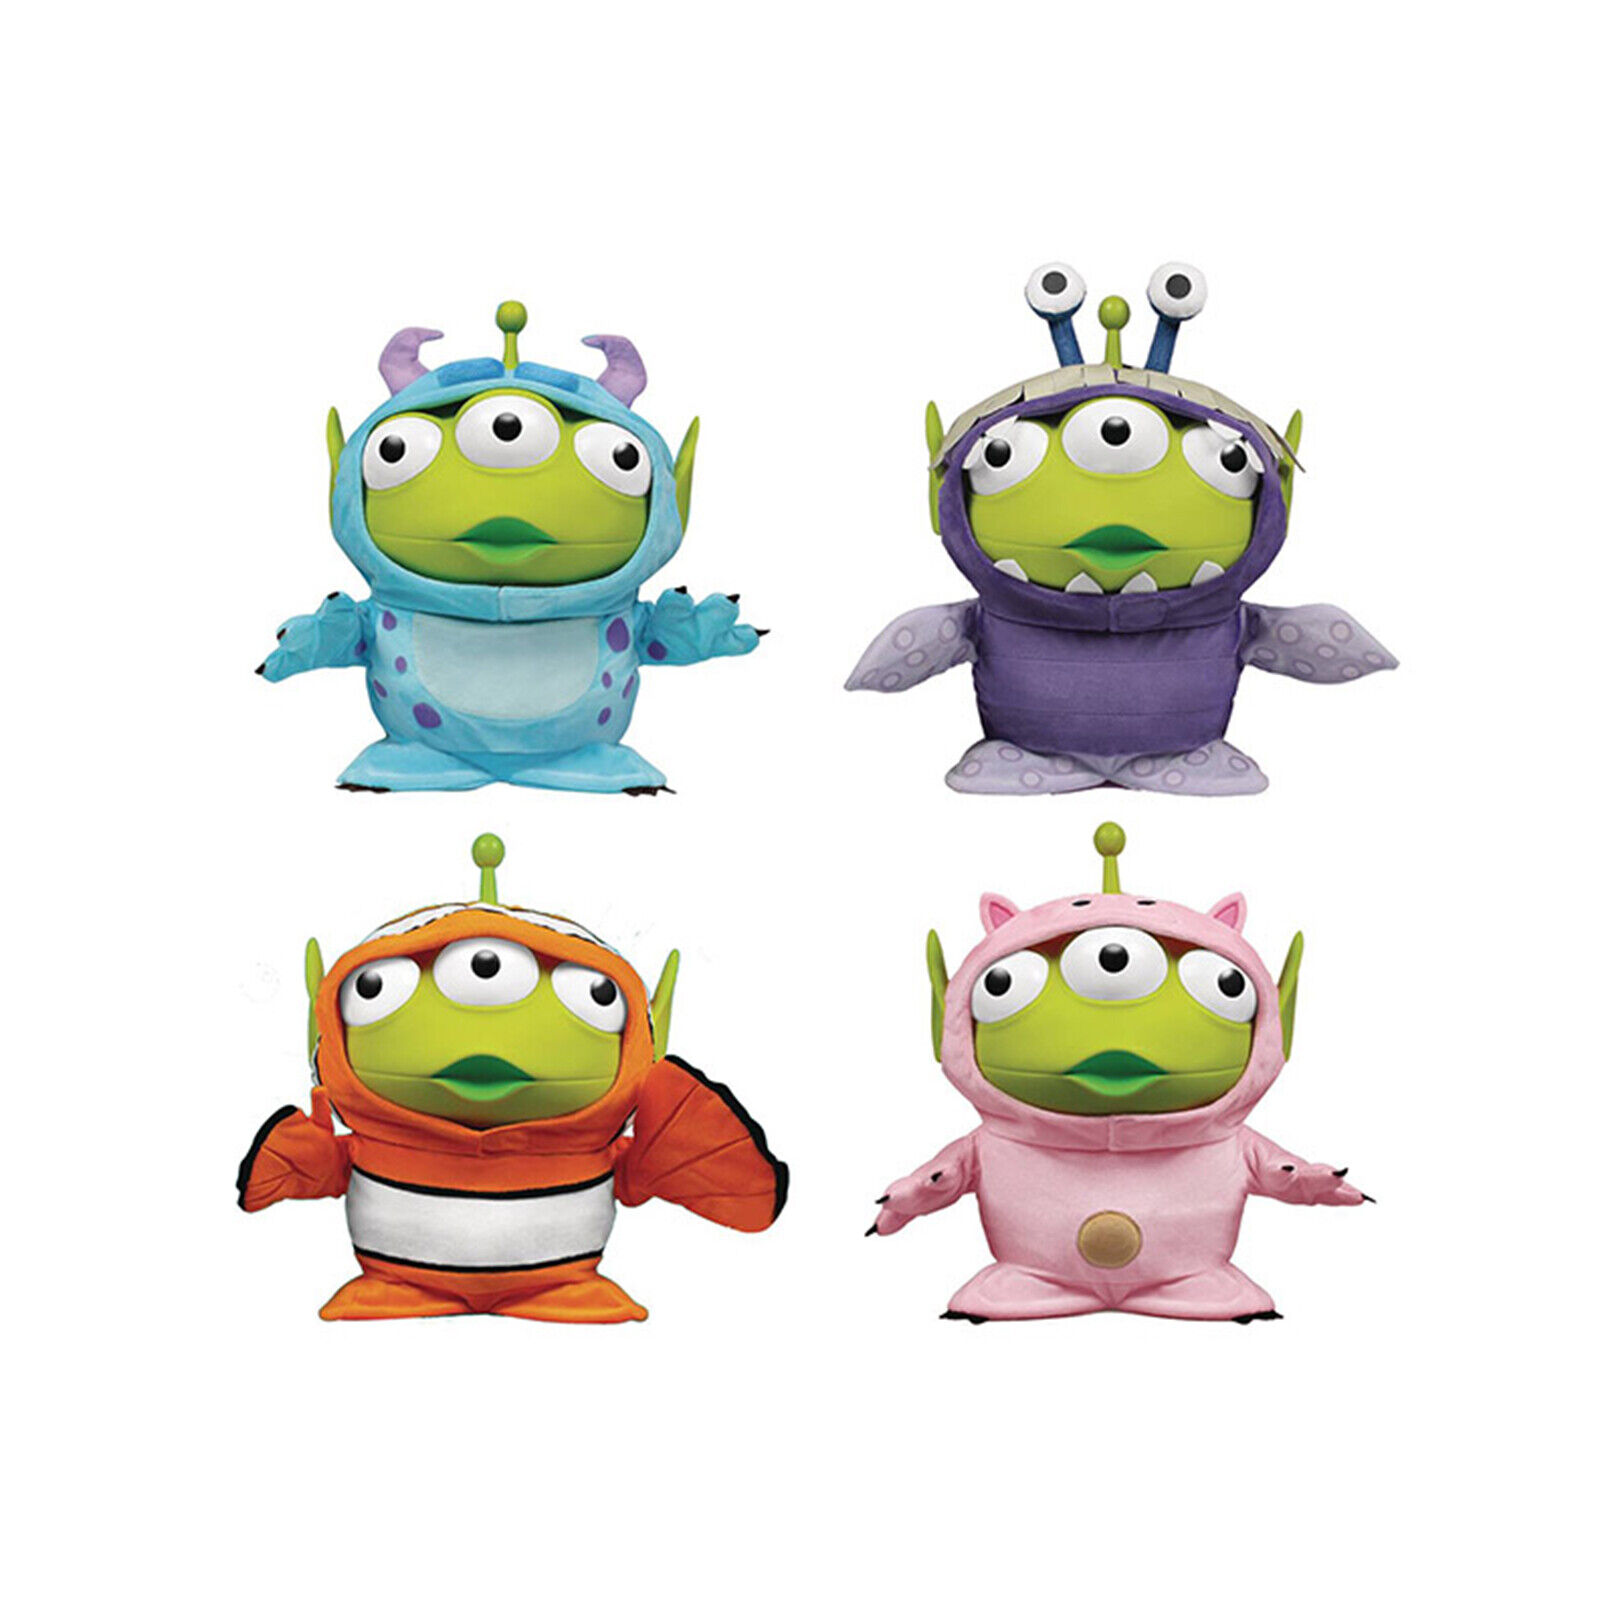 Pixar Characters Pixar Fest Volume 5 Figure Collection Blind Box NEW IN STOCK